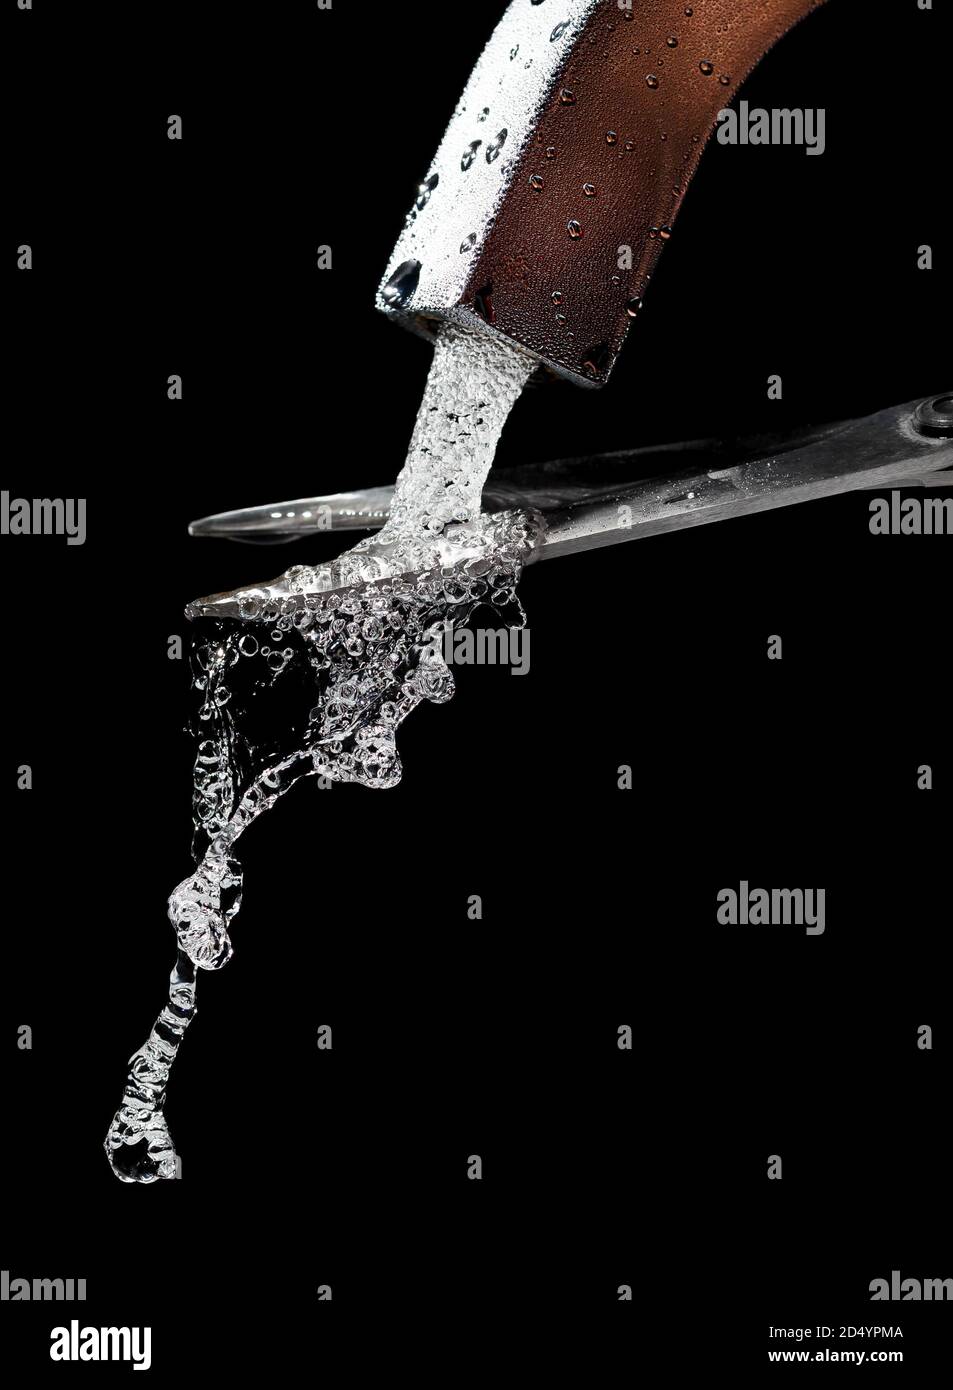 Scissors cut a stream of clean, cold water from a misted tap. Stock Photo